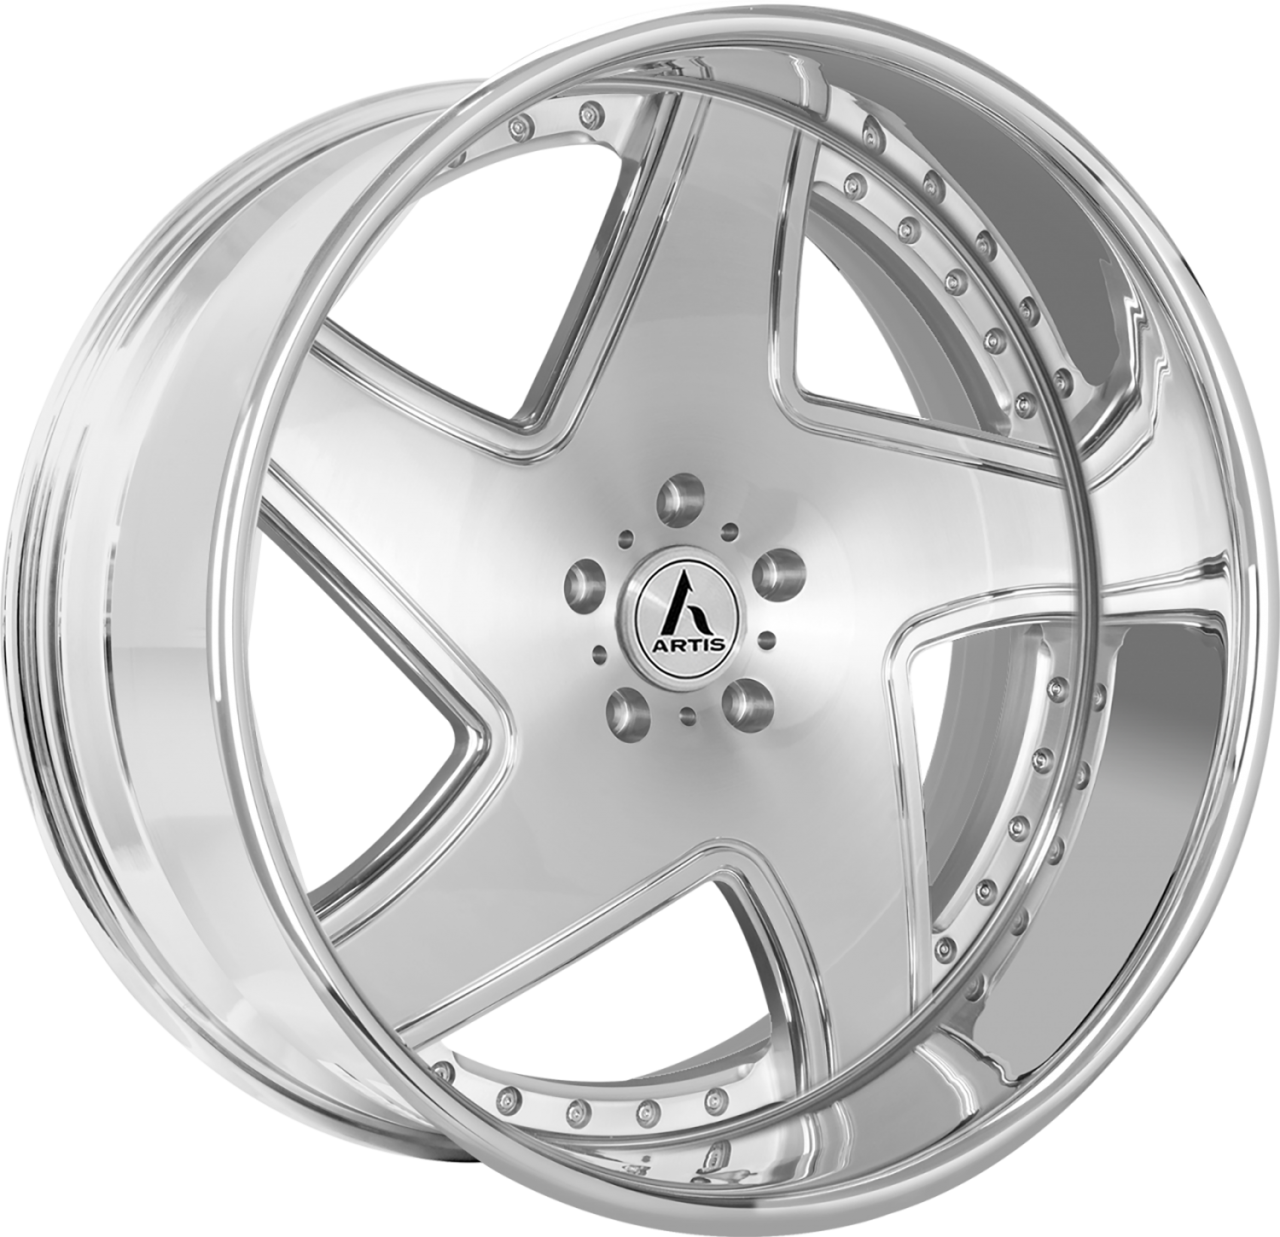 Artis Forged Dawn-M wheel with Brushed finish